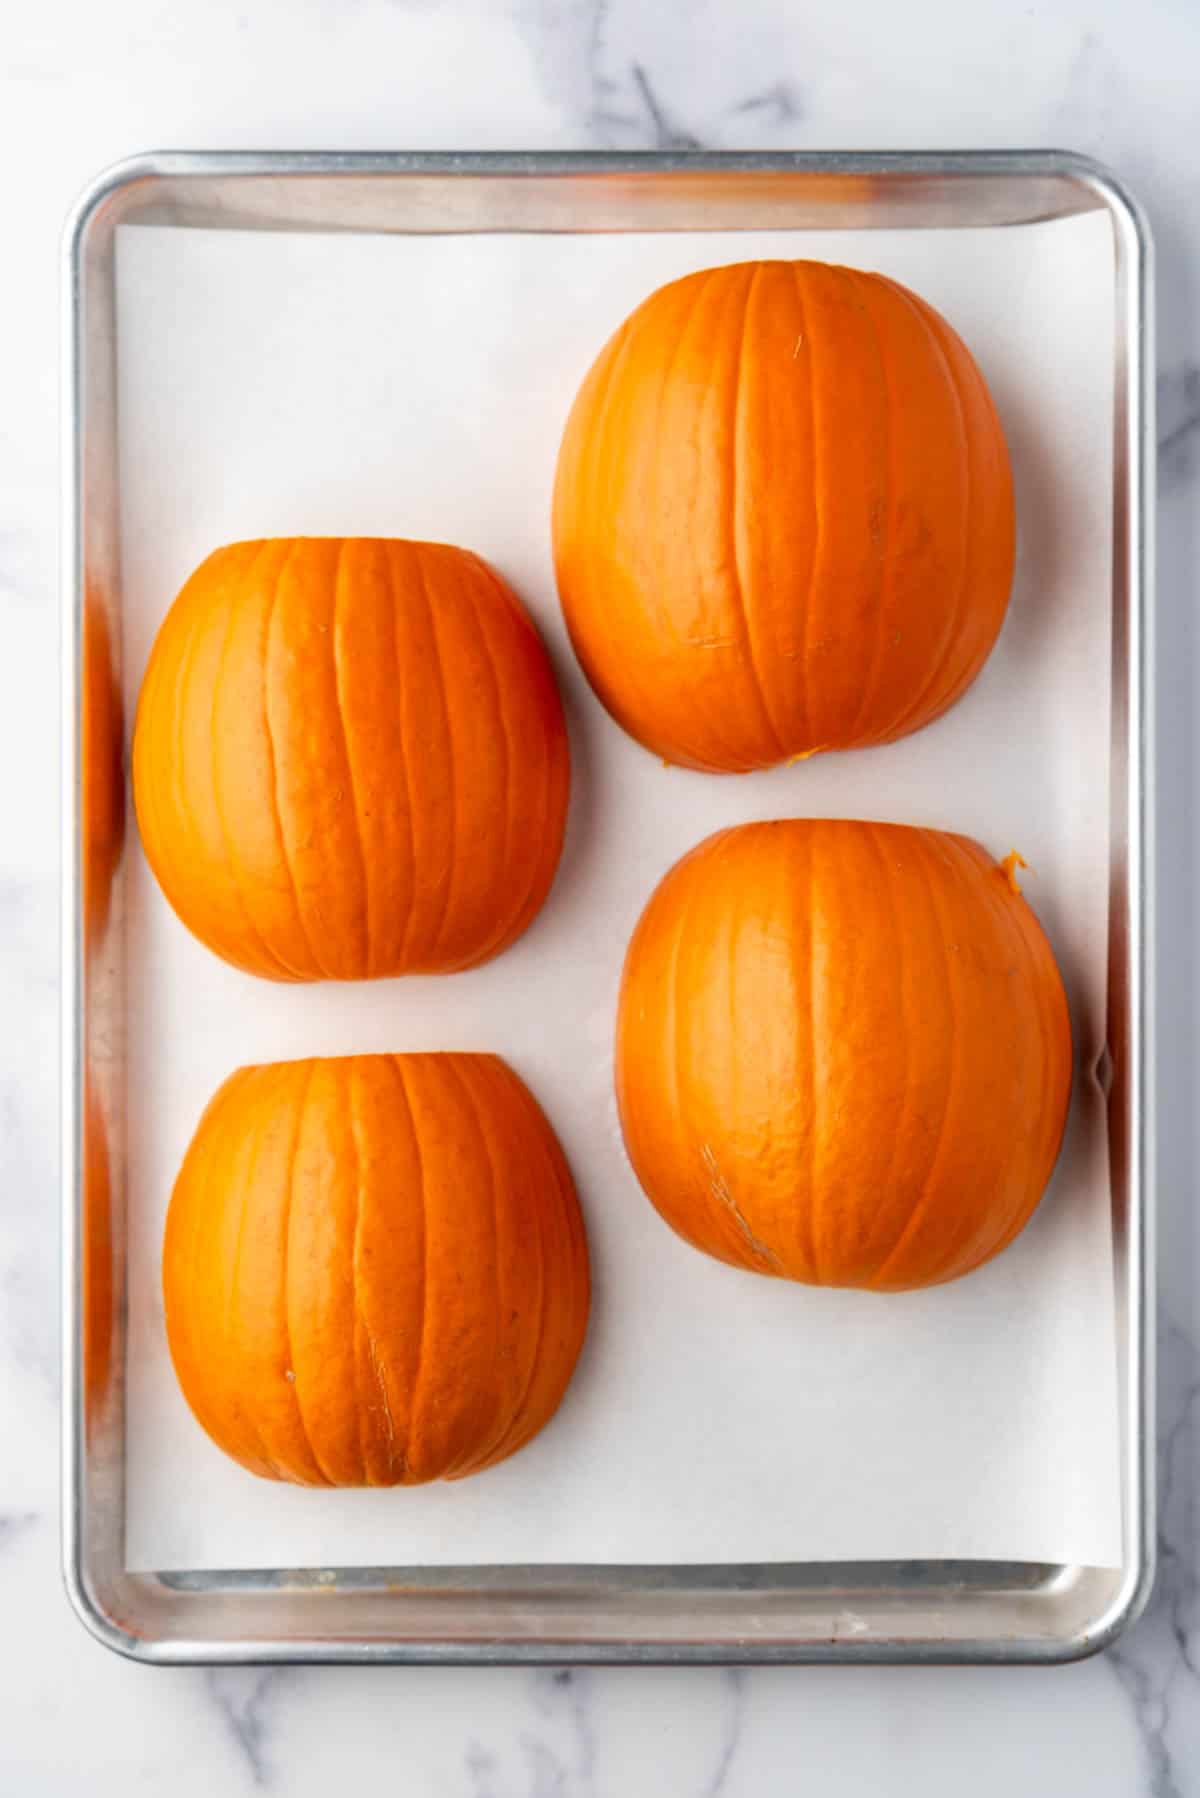 Sugar pumpkin halves on a baking sheet lined with parchment paper.